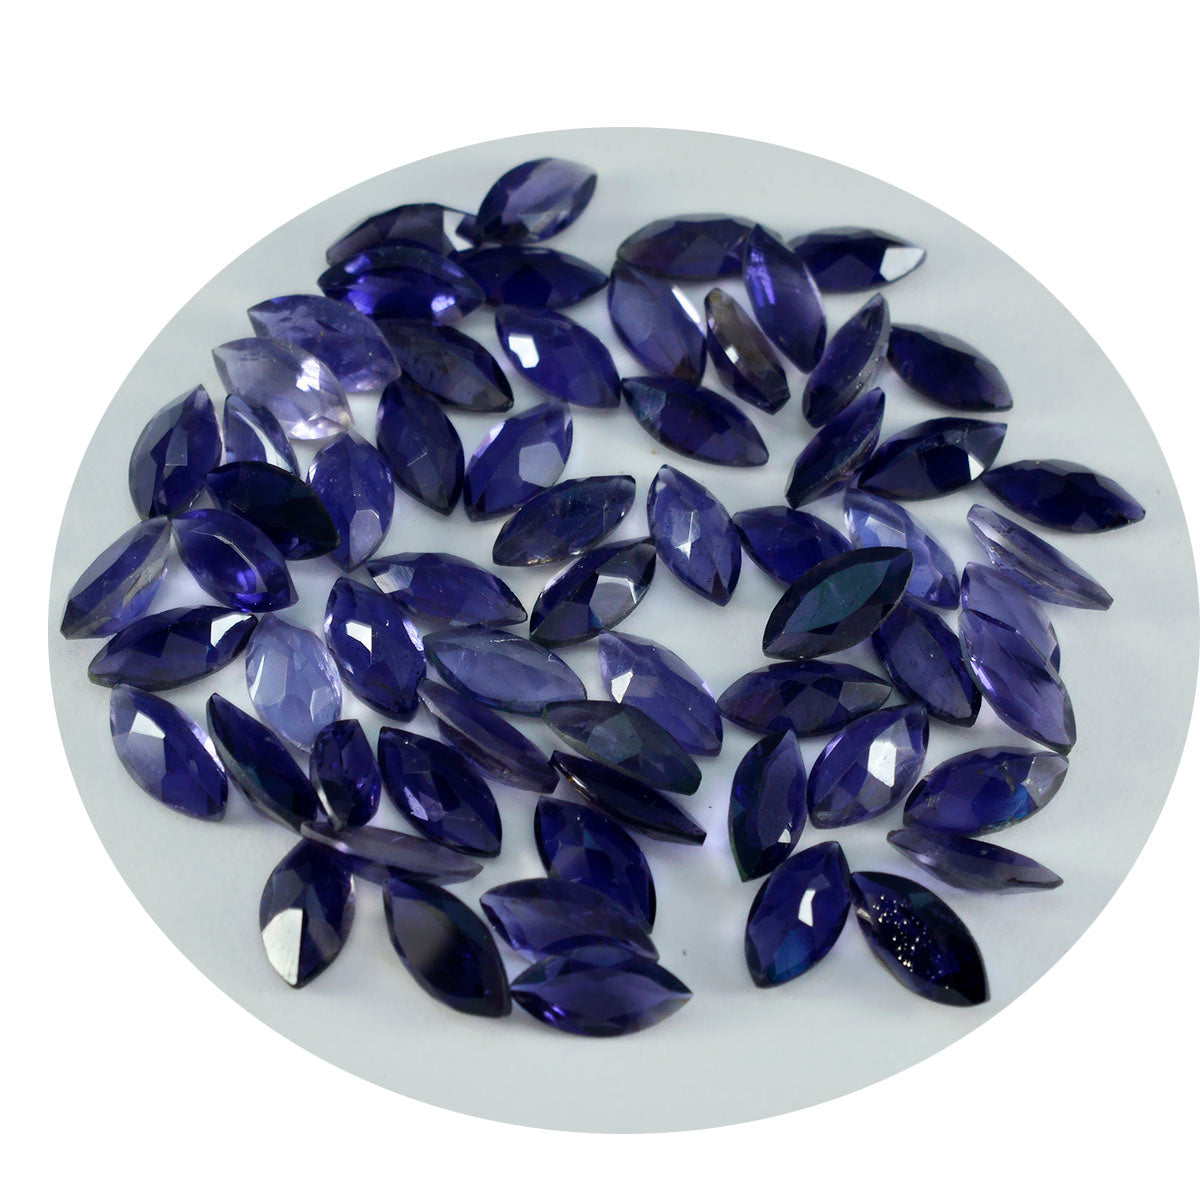 Riyogems 1PC Blue Iolite Faceted 5x10 mm Marquise Shape great Quality Gems